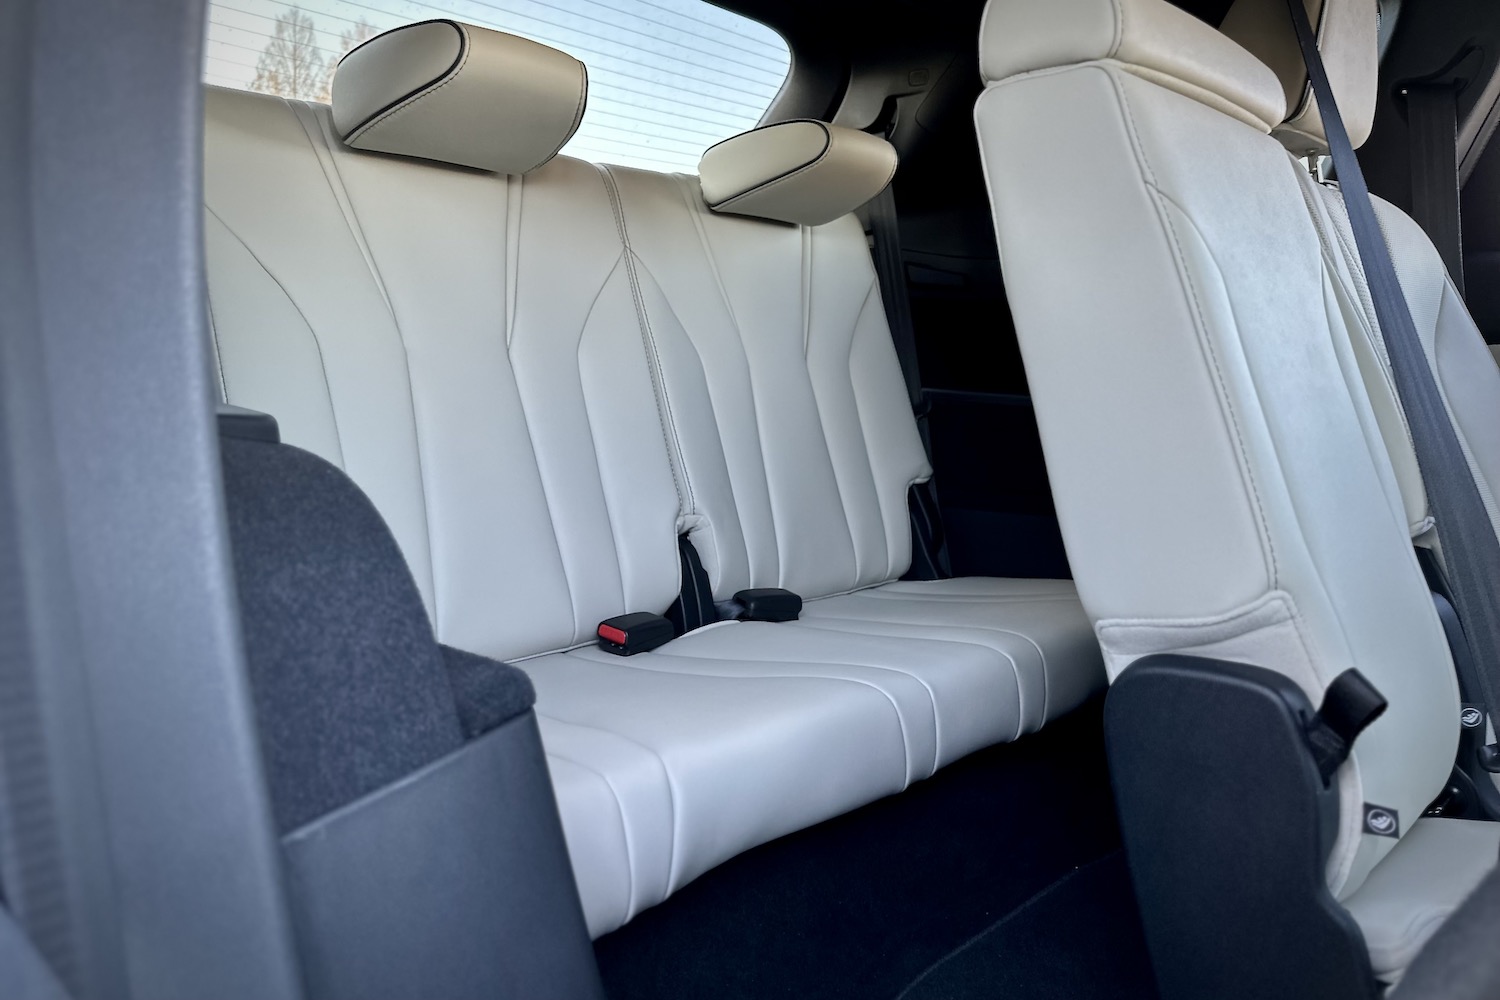 Third-row seats in the 2022 Acura MDX Type S from outside the vehicle.